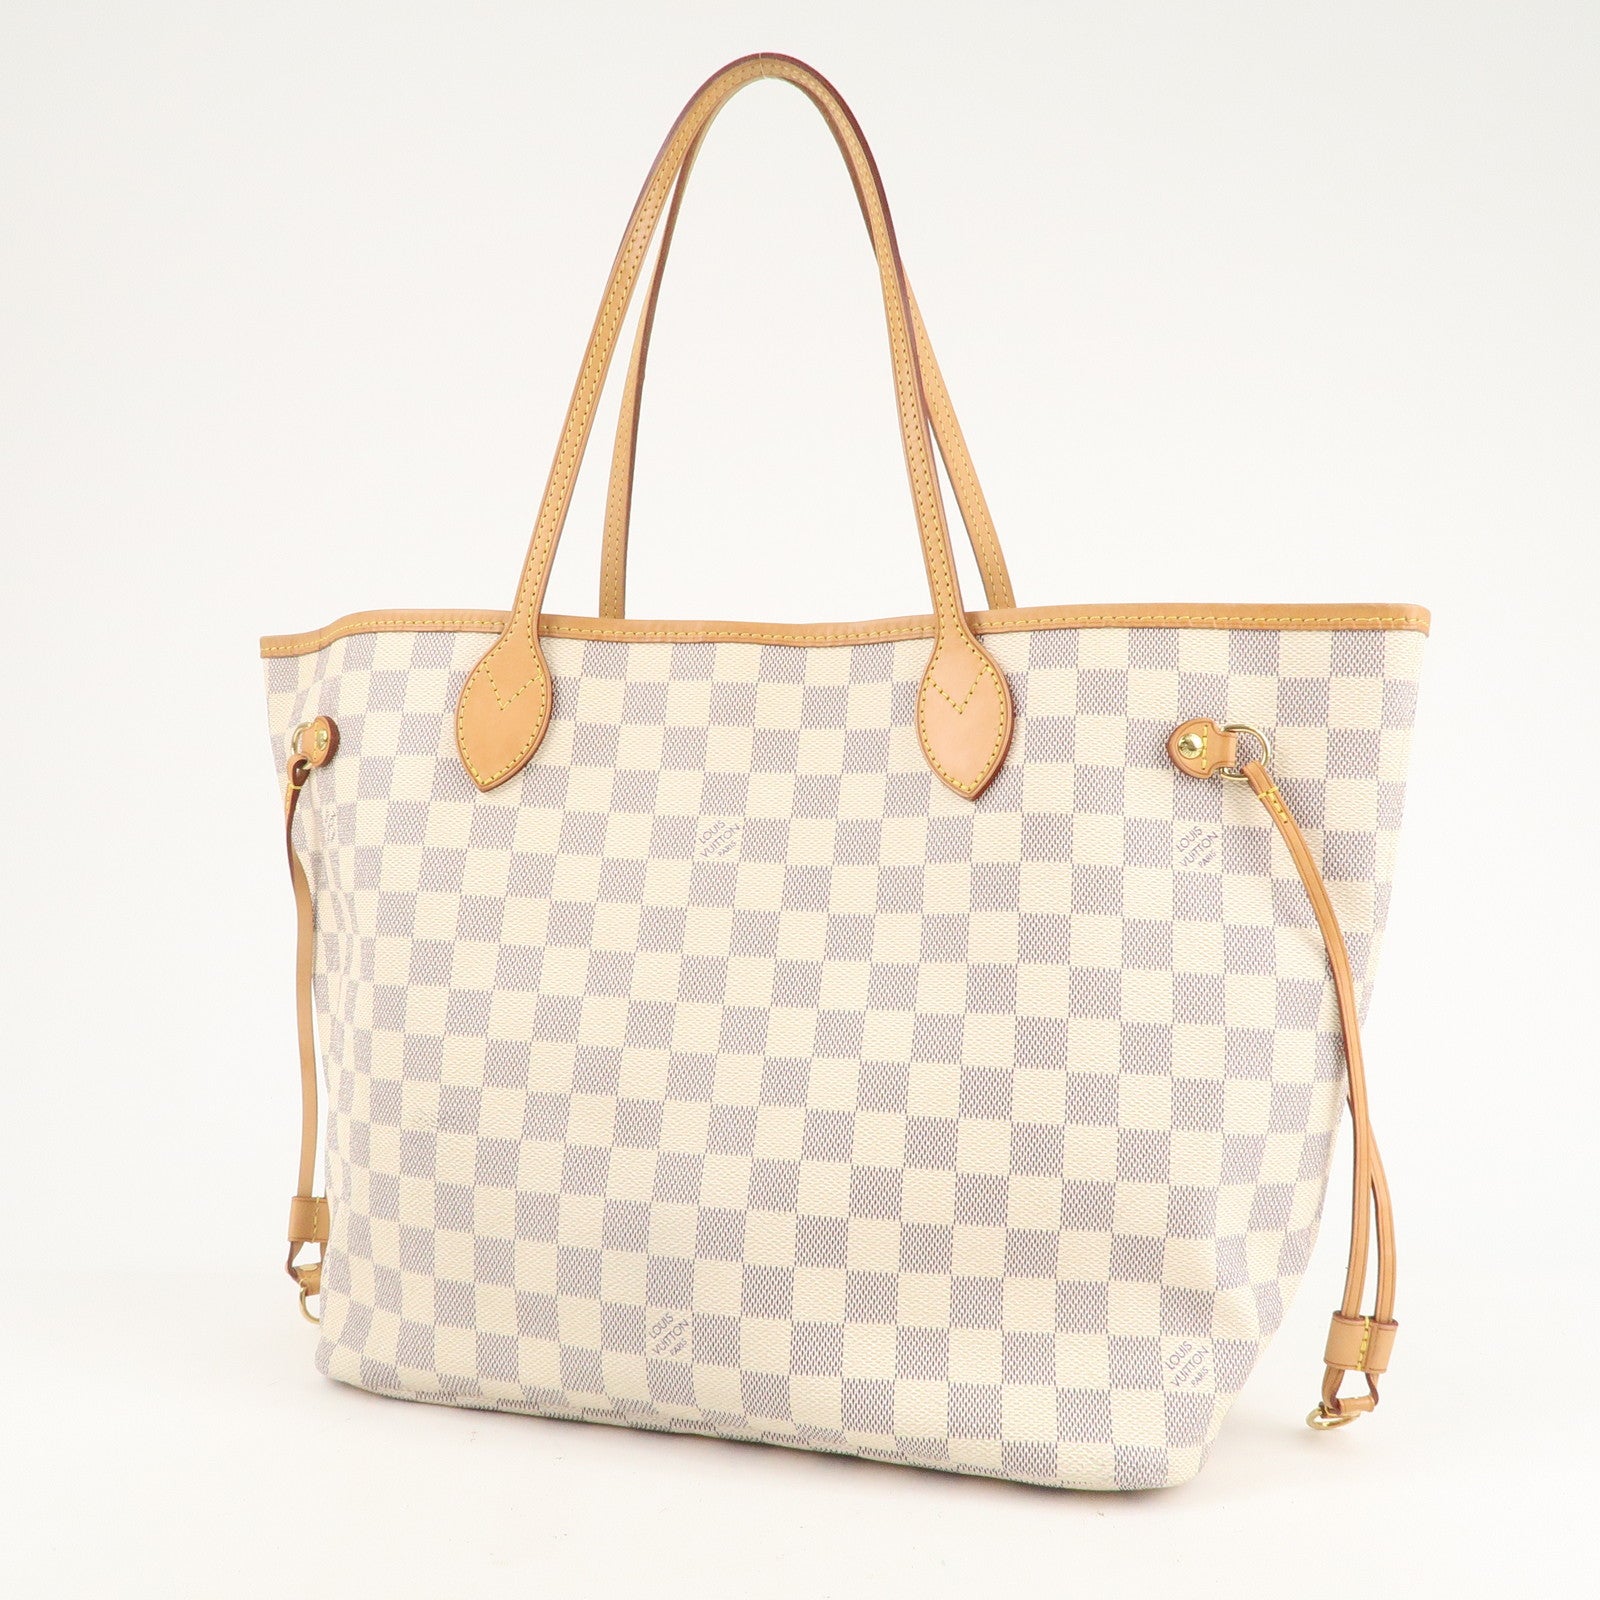 Louis Vuitton Bag With Pockets Portugal, SAVE 51